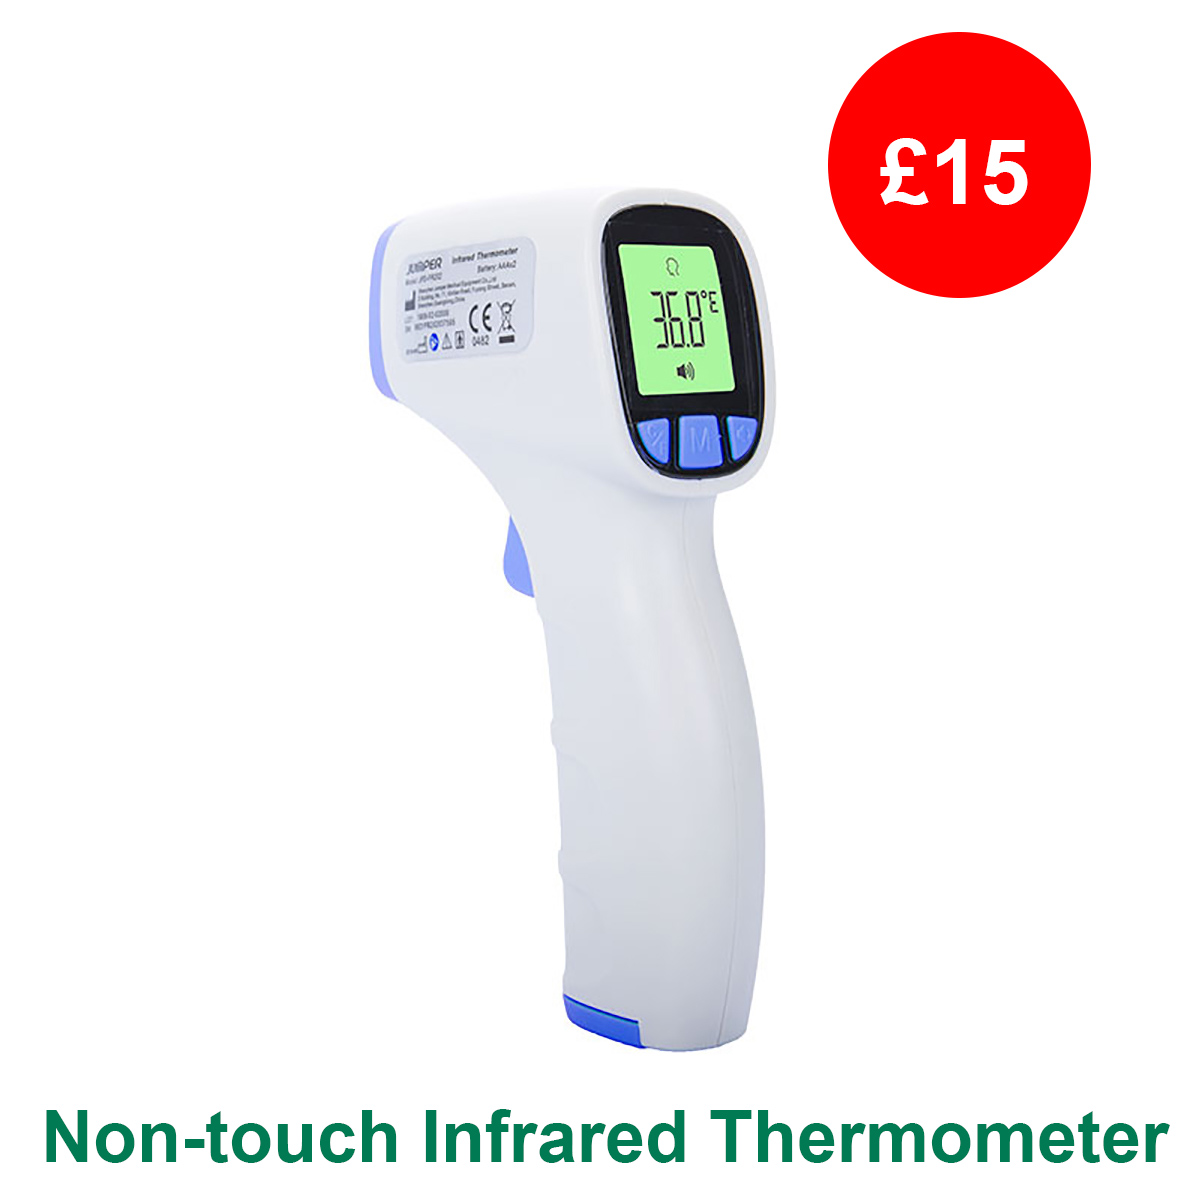 Non-touch Infrared Thermometer